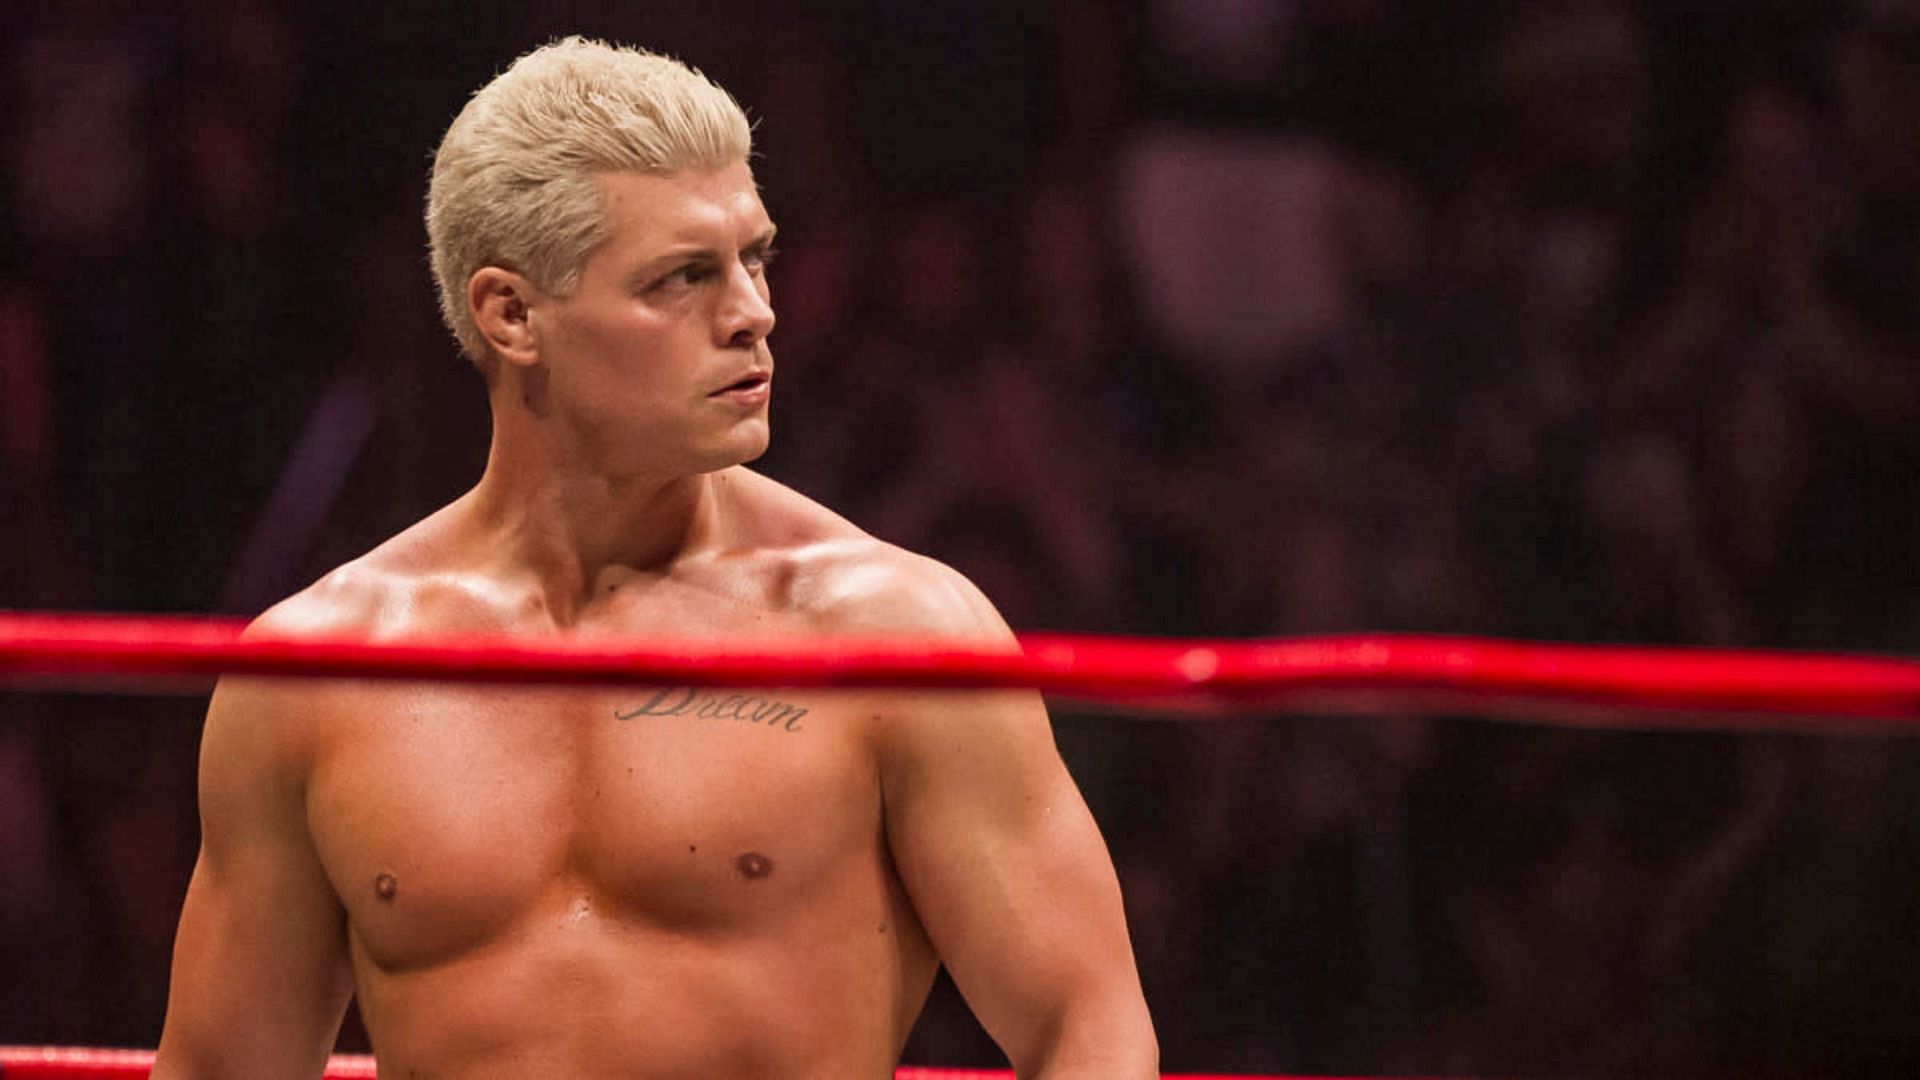 Cody Rhodes at the All In event in 2018